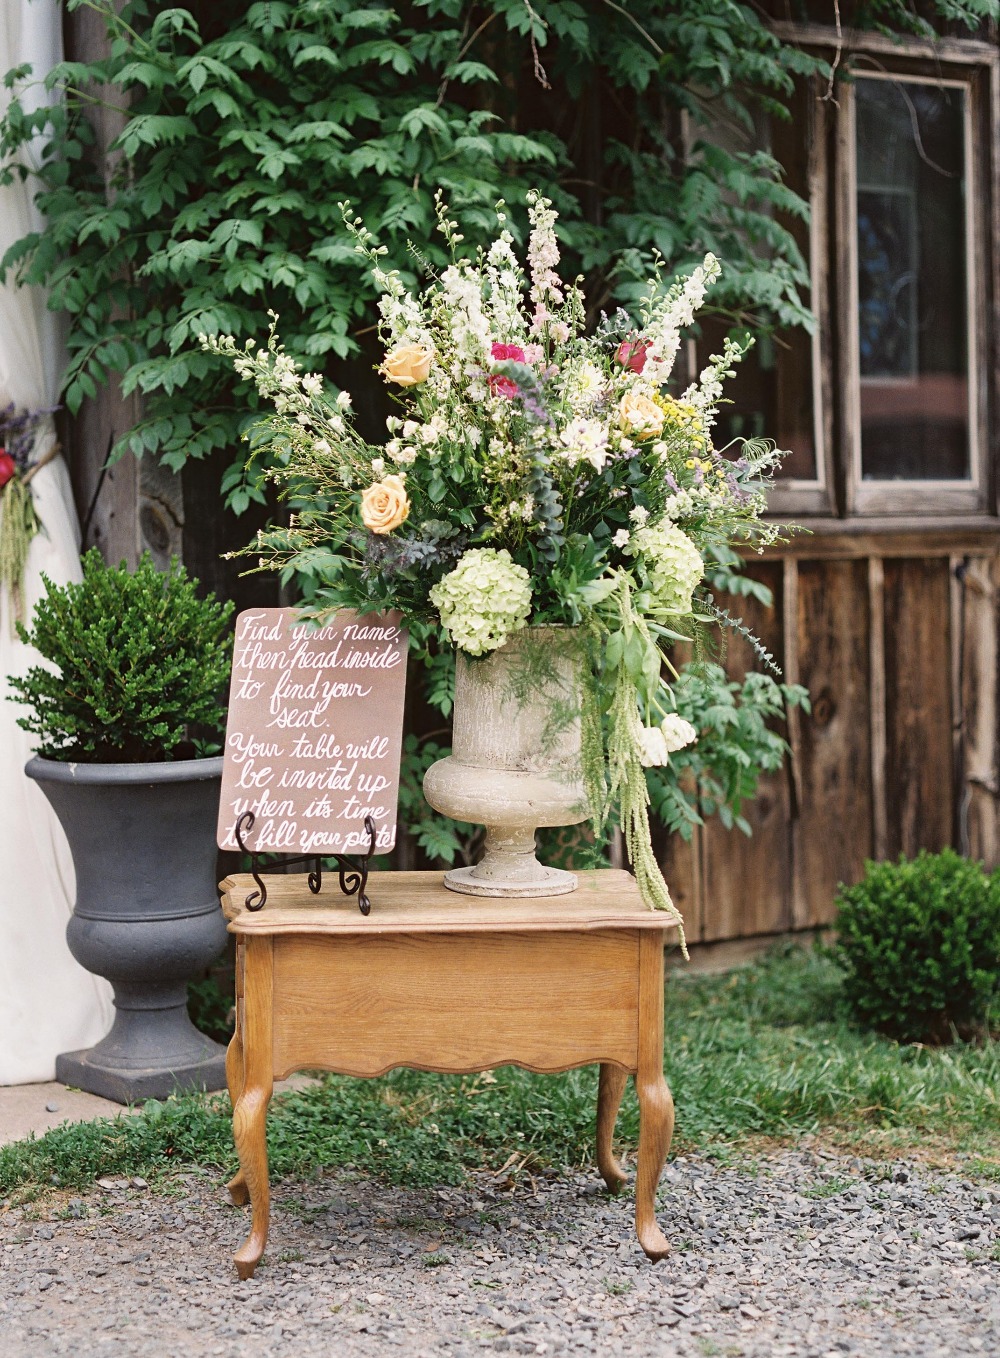 Giant florals and wedding sign